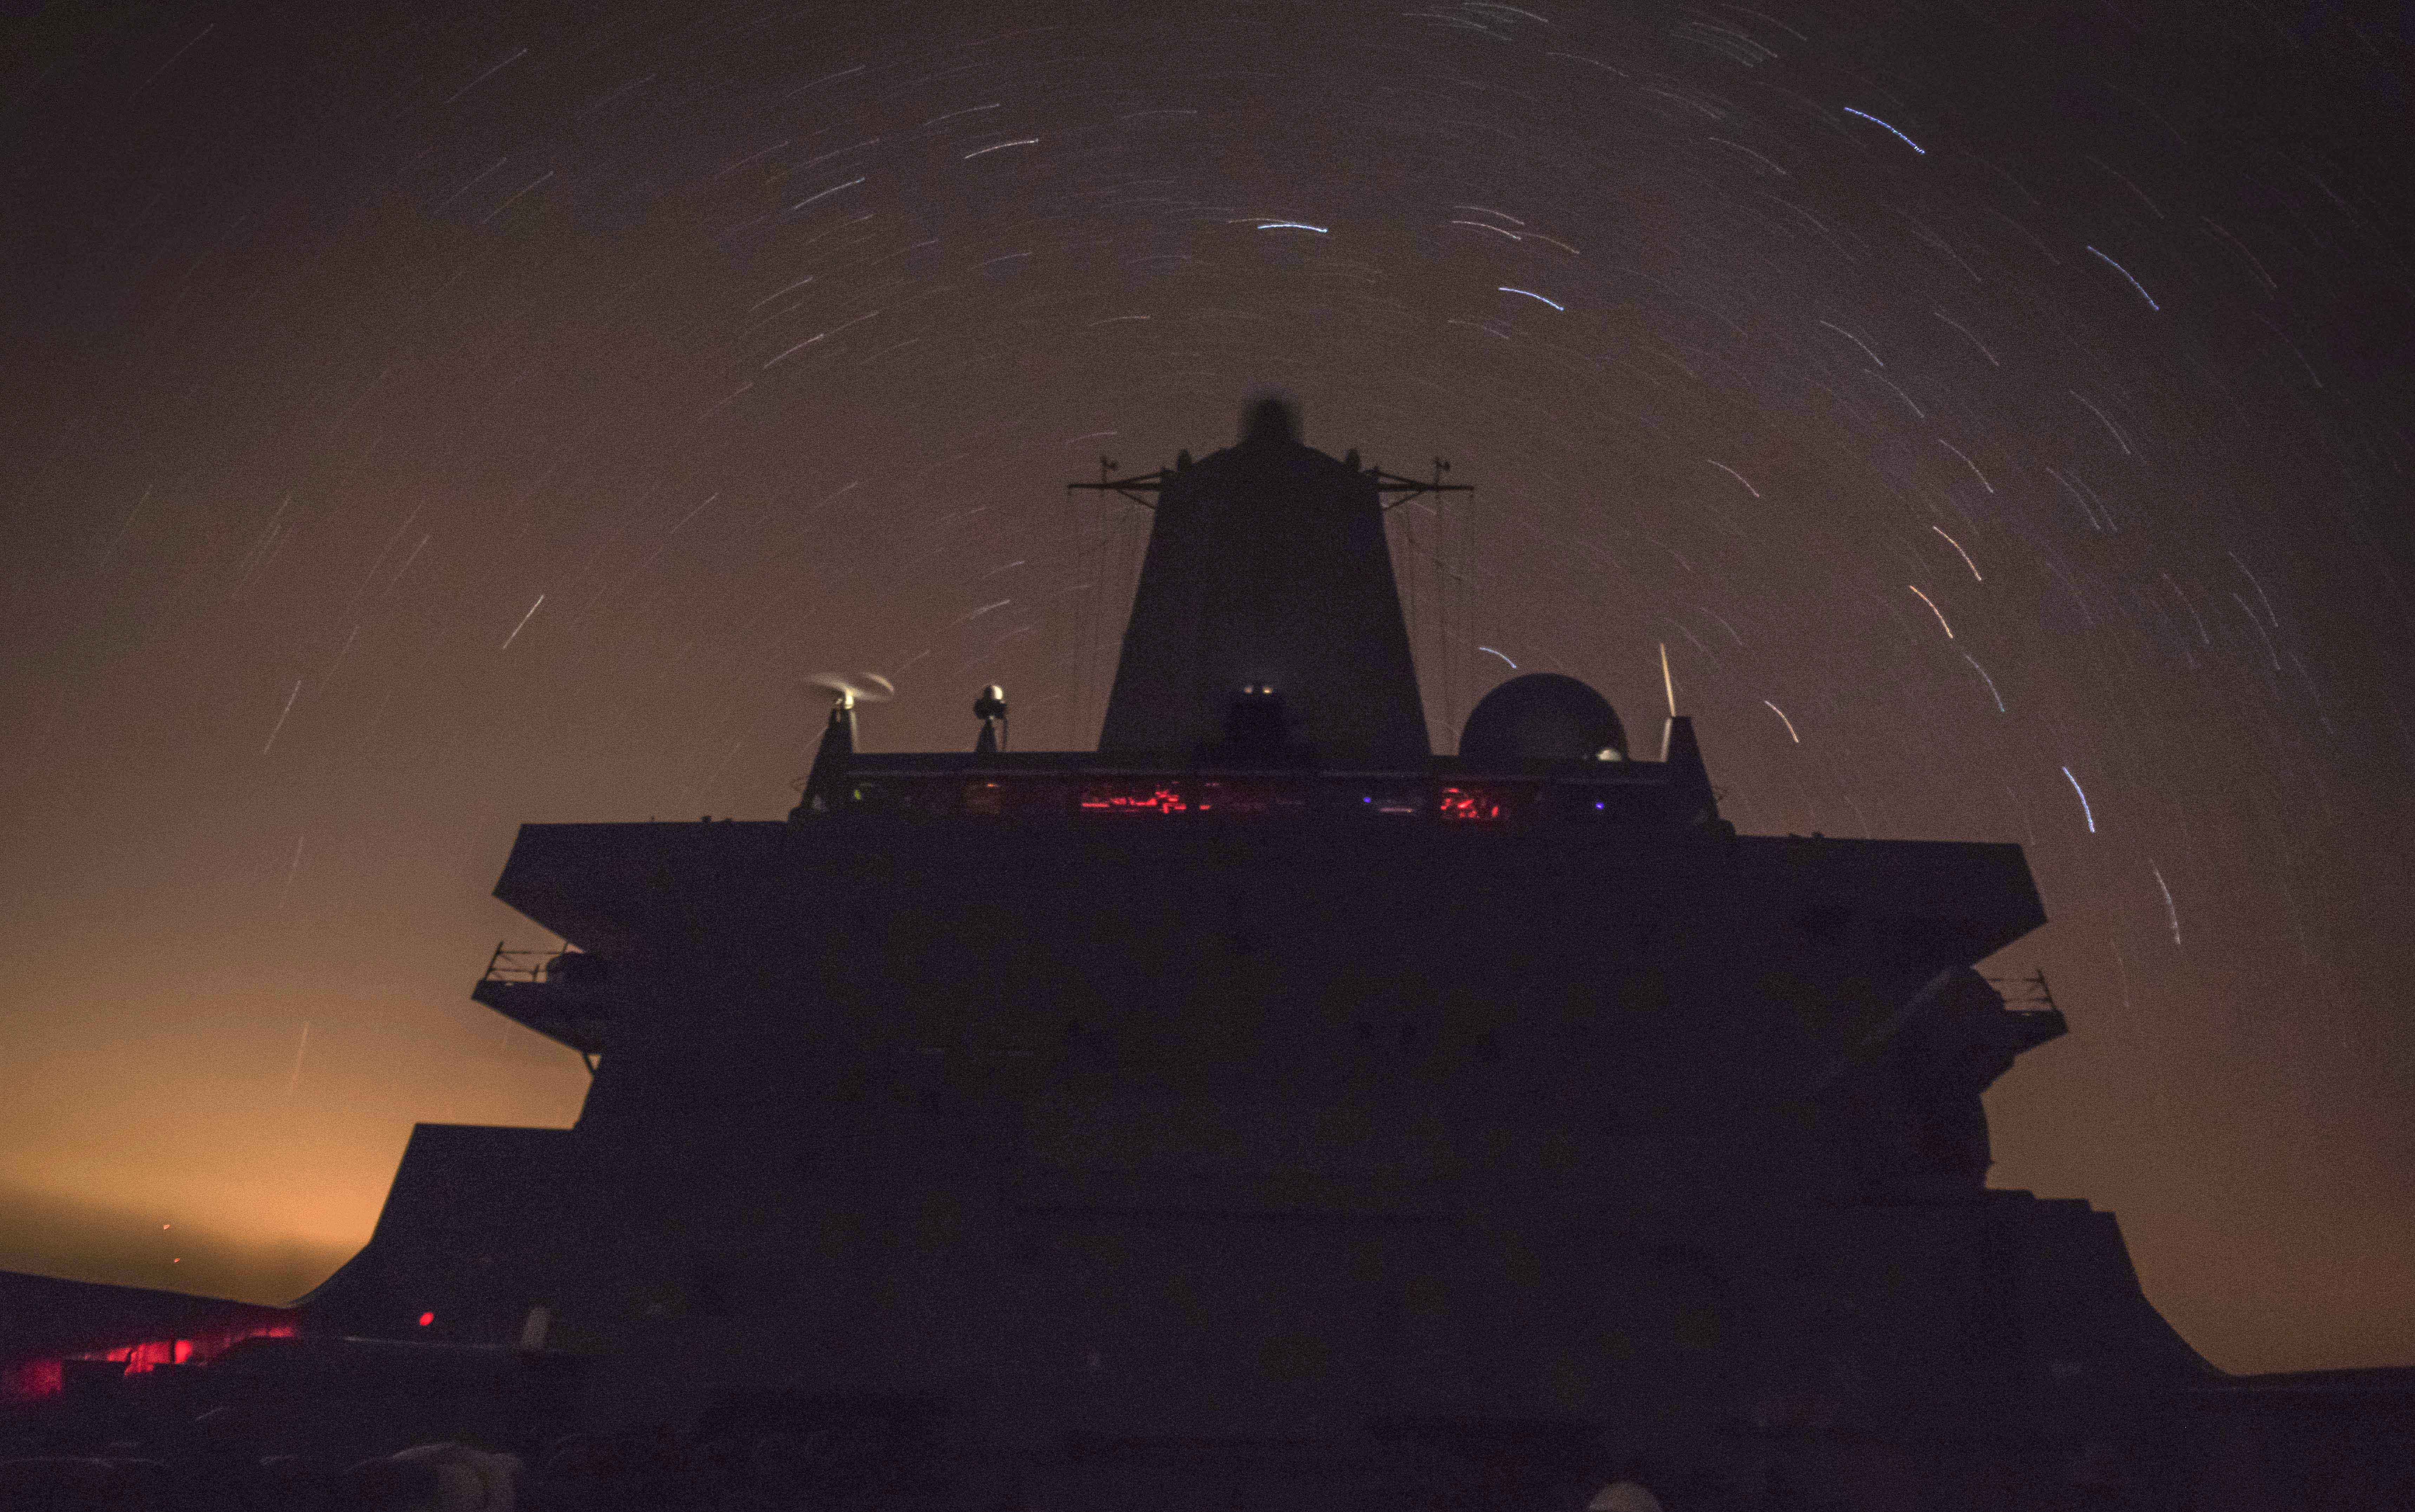 USS New Orleans (LPD-18) transits the Pacific Ocean at night. US Navy Photo